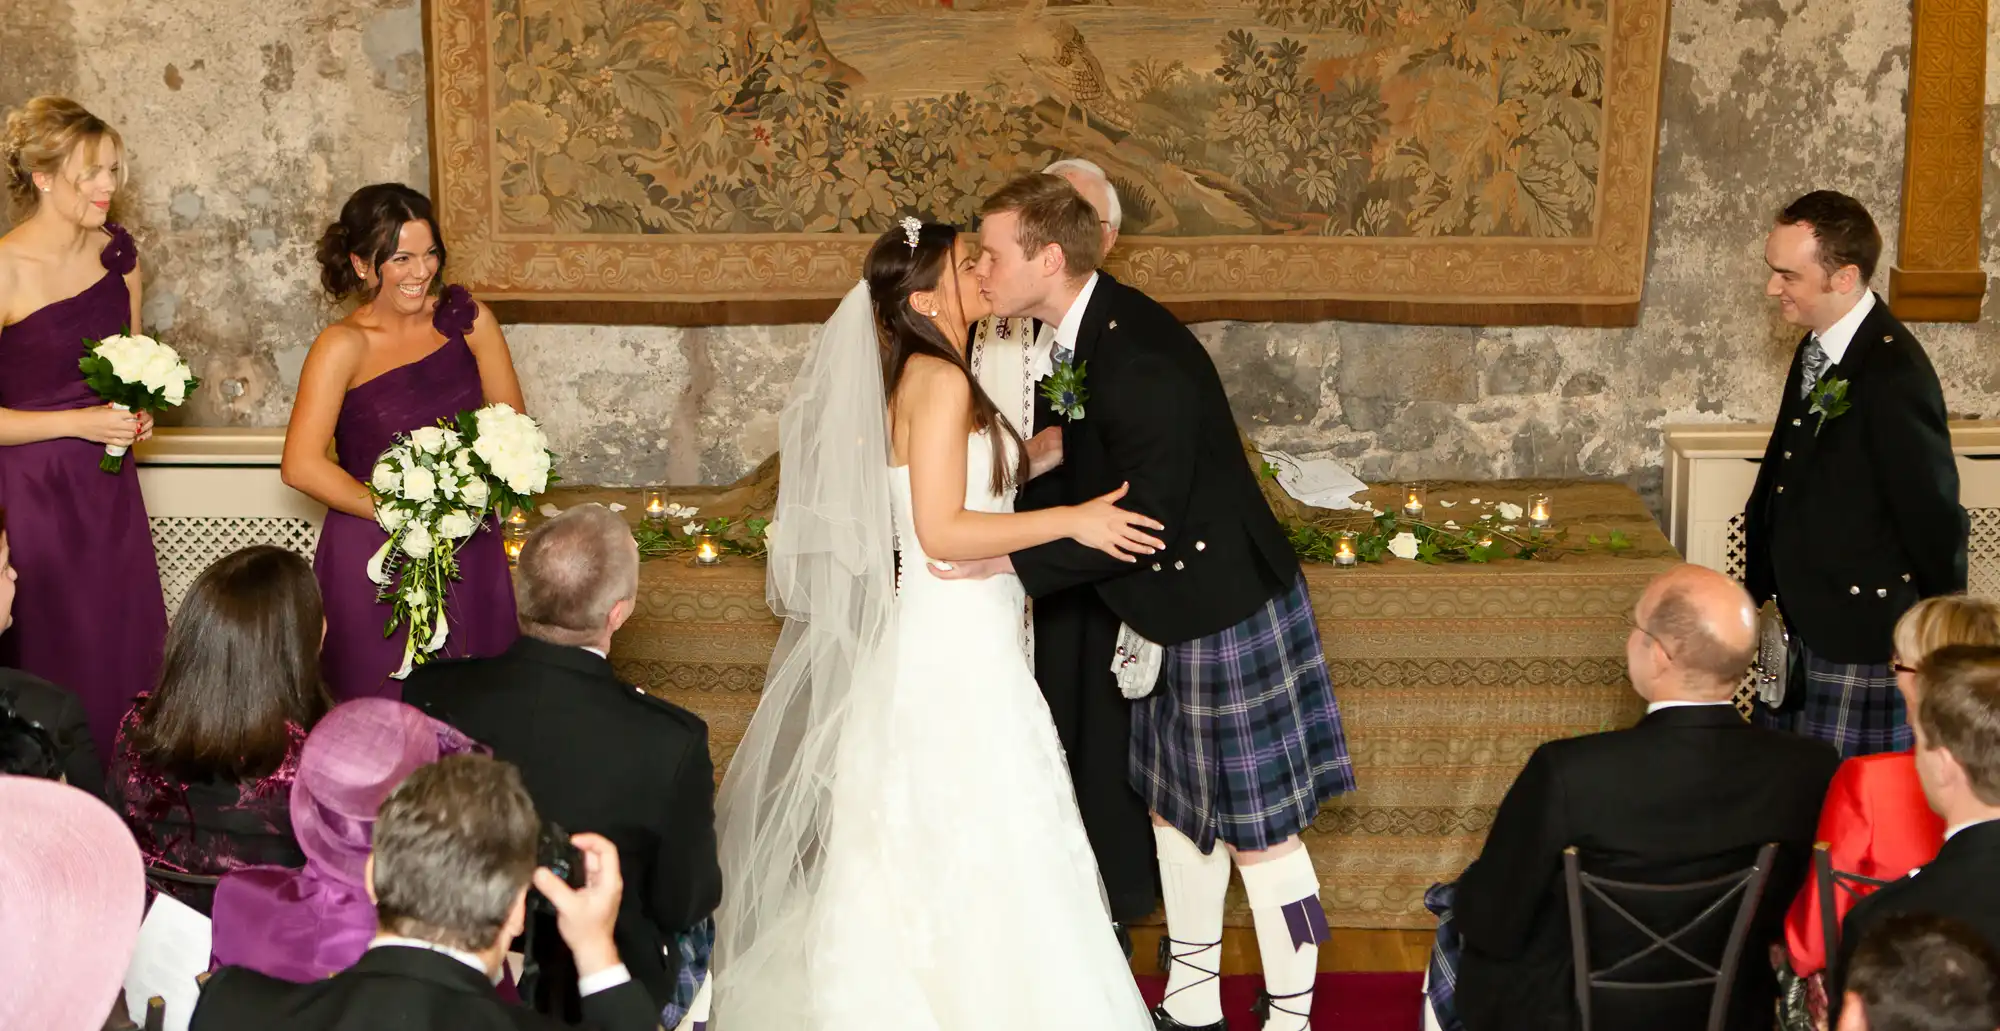 A bride and groom kissing at their wedding ceremony, with the groom wearing a kilt. bridesmaids in purple dresses and guests are watching.